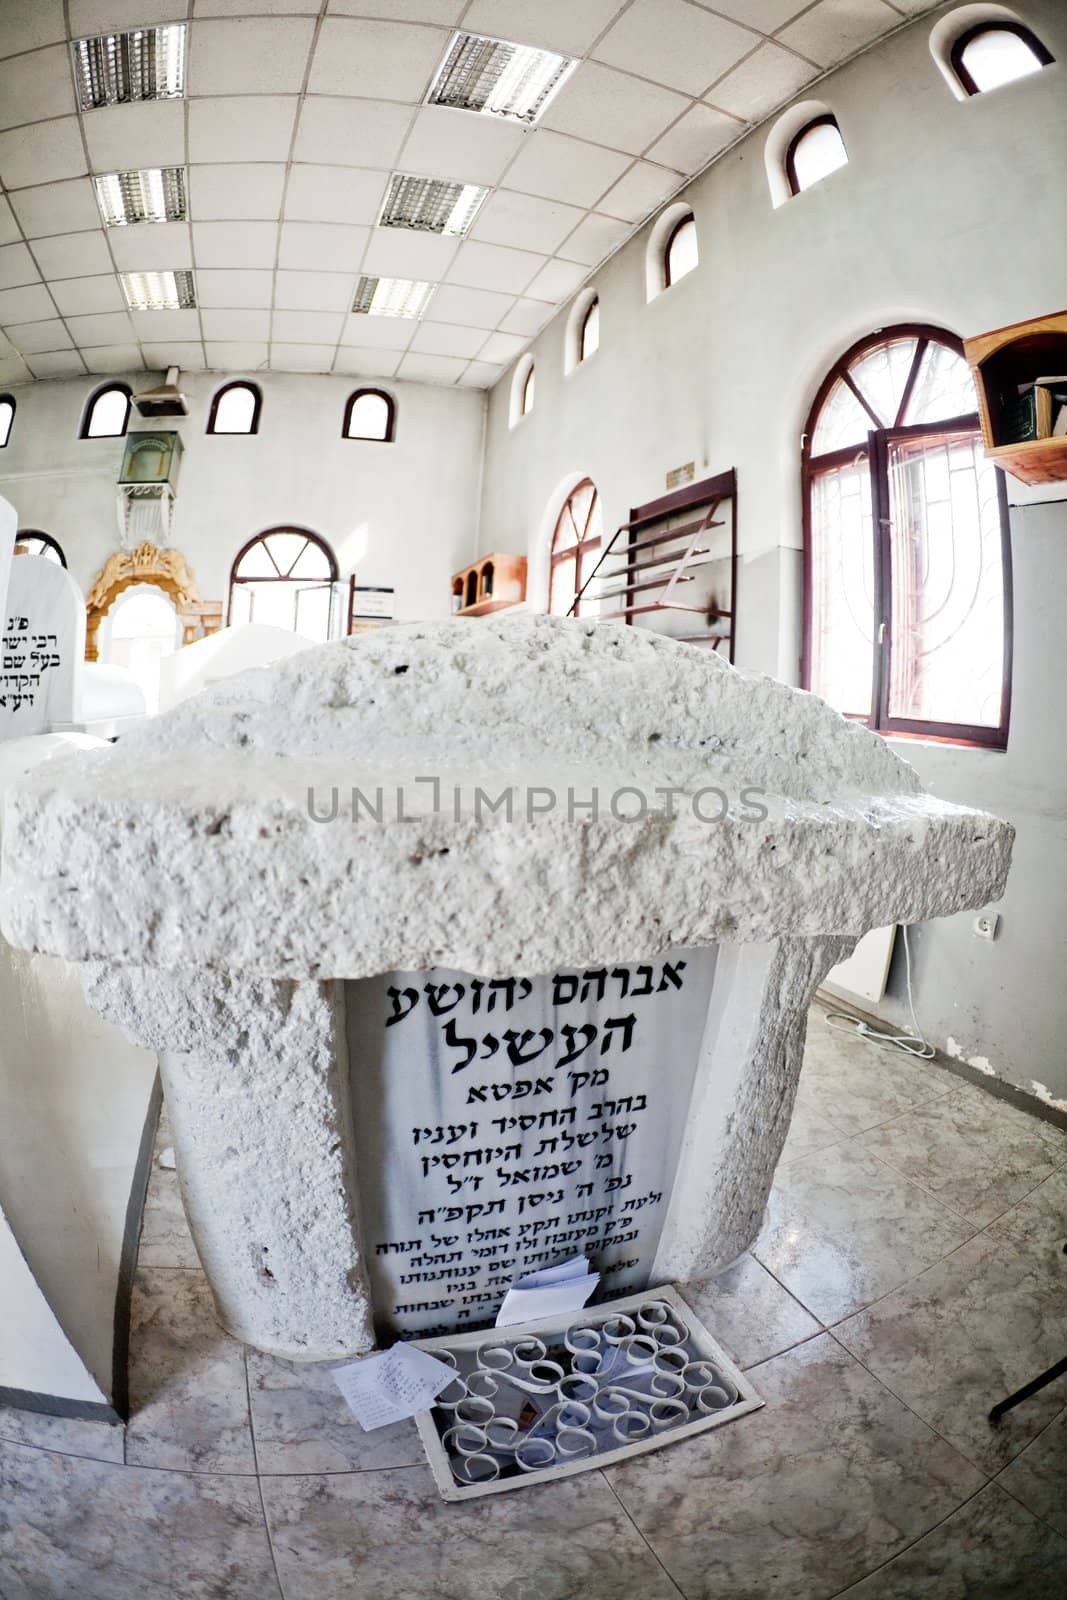 An image of grave of rabbi Baal Shem Tow (Ukraine)